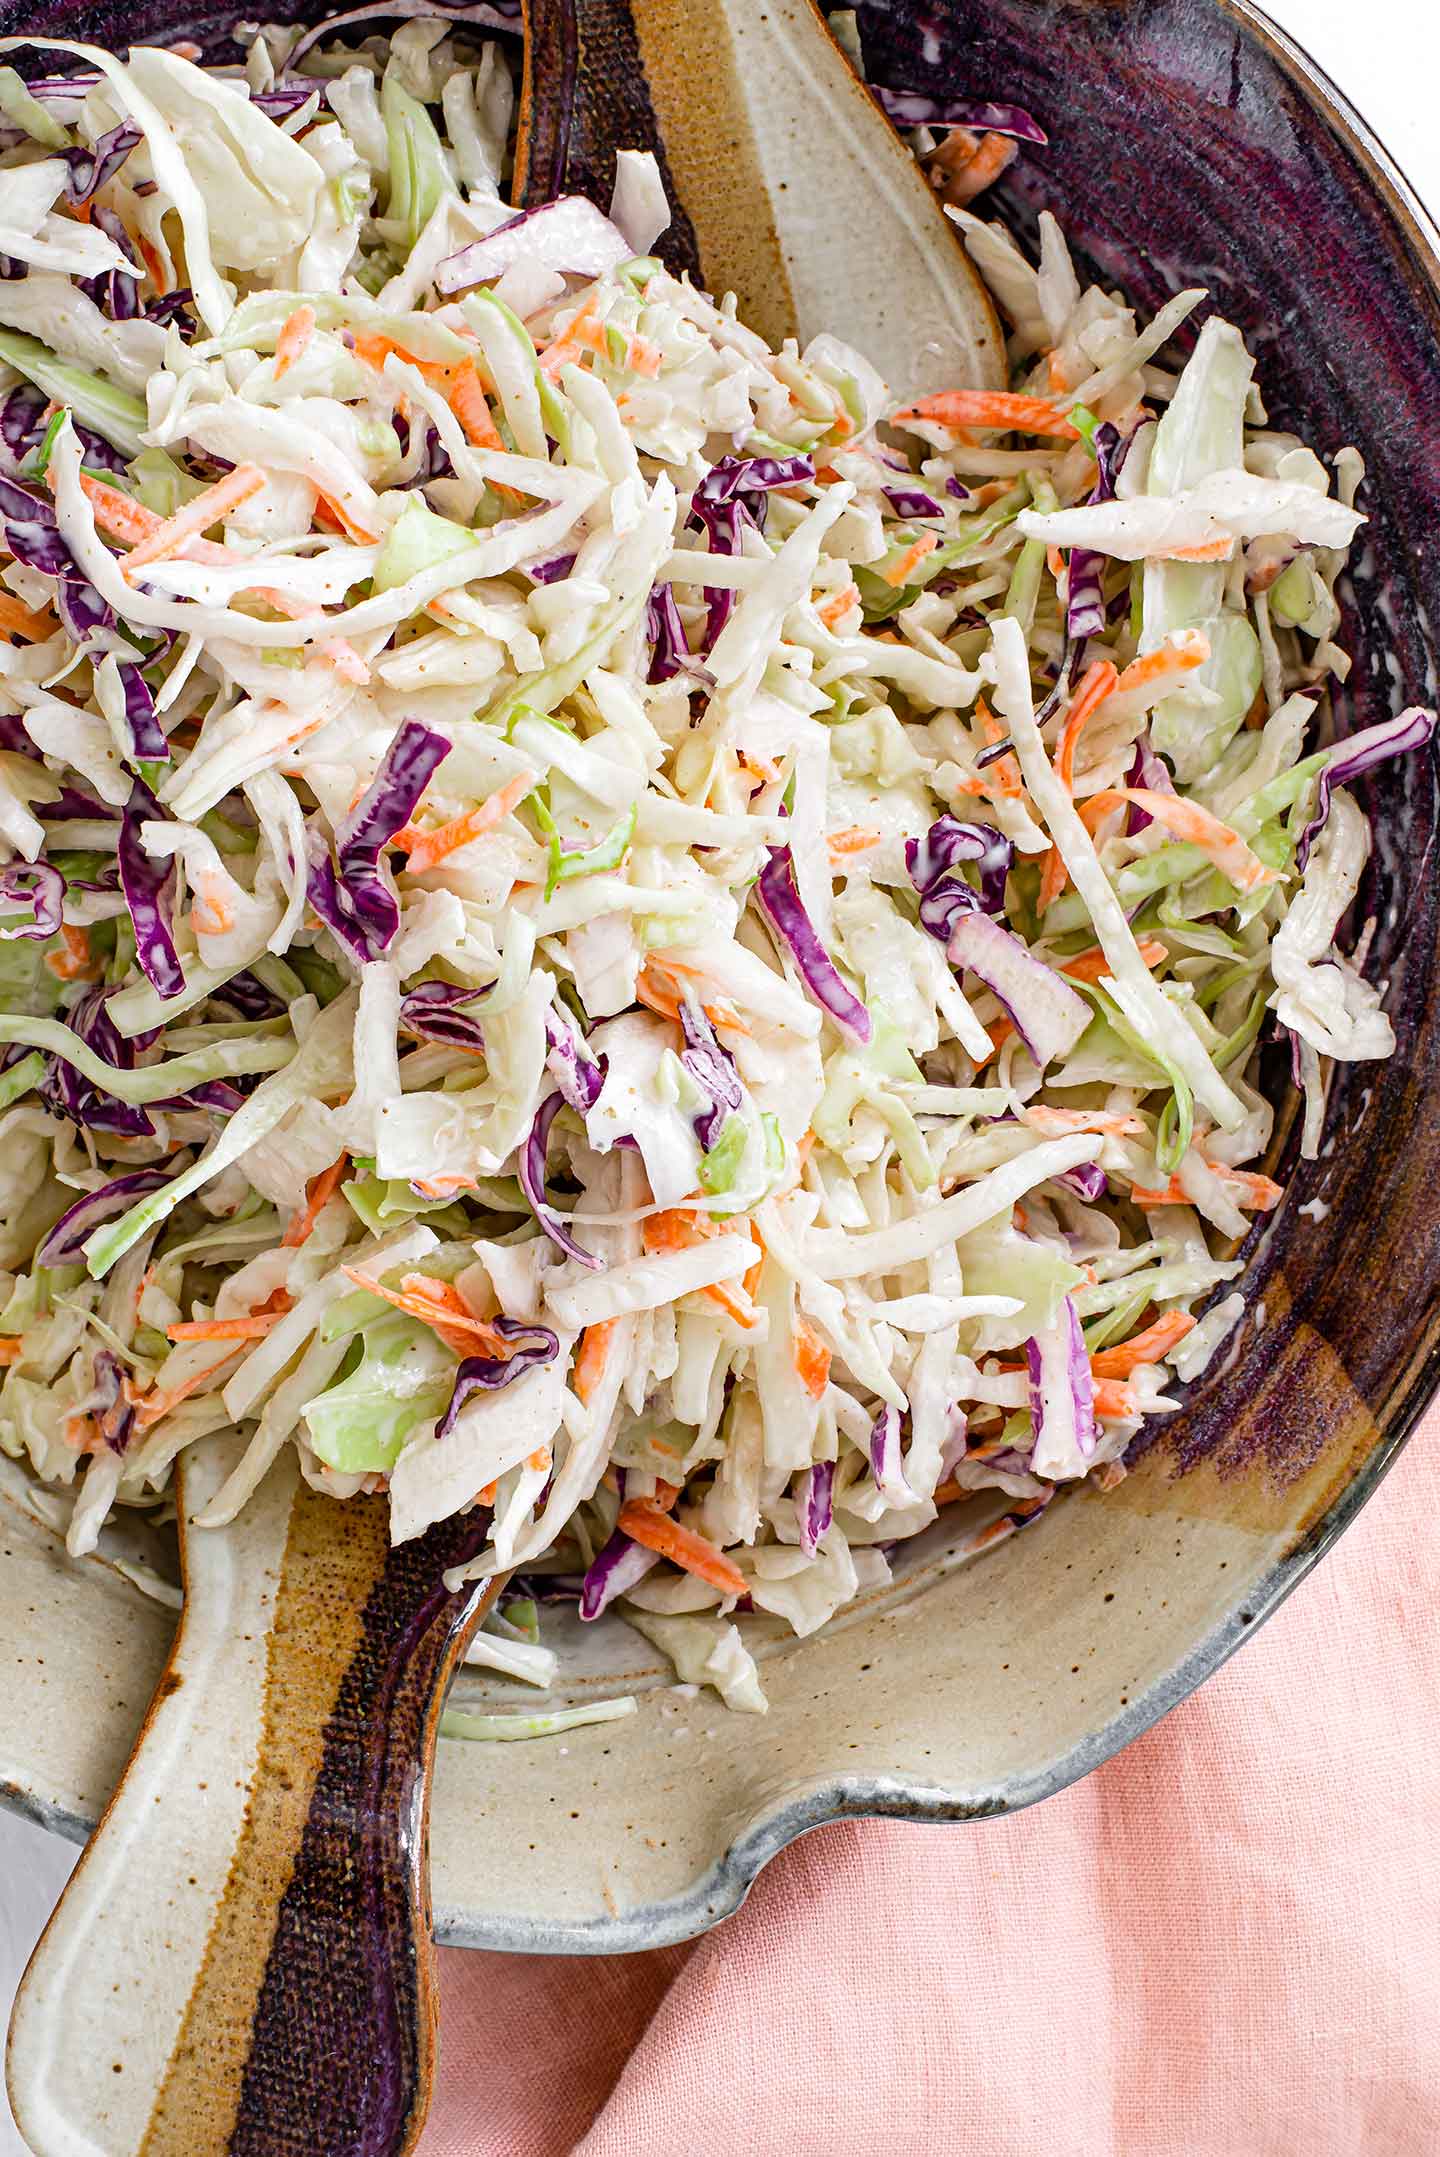 Top down view of a summery vegan coleslaw recipe in a ceramic salad bowl. Shredded green and red cabbage are mixed with shredded carrot and tossed in our sweet and tangy dressing.